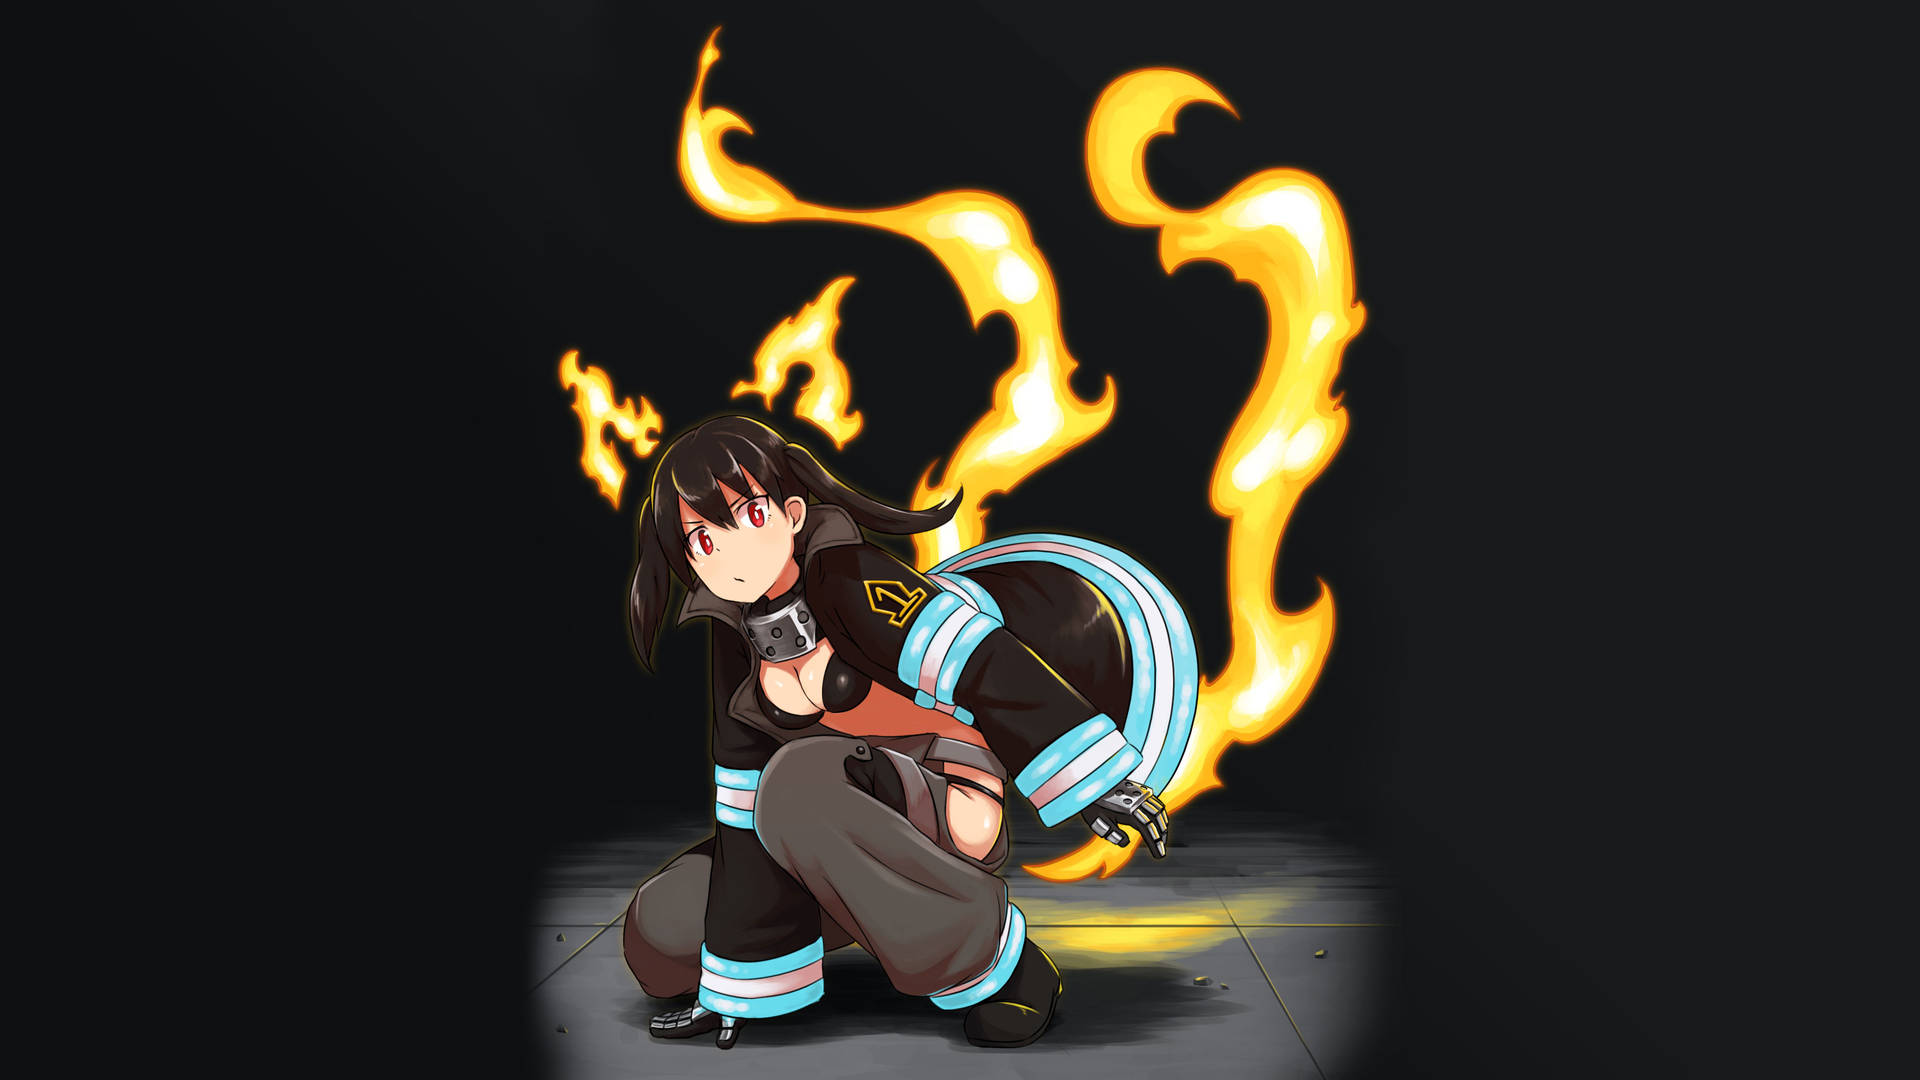 Tamaki and Kotatsu, two flames bravely fighting together against the inferno. Wallpaper